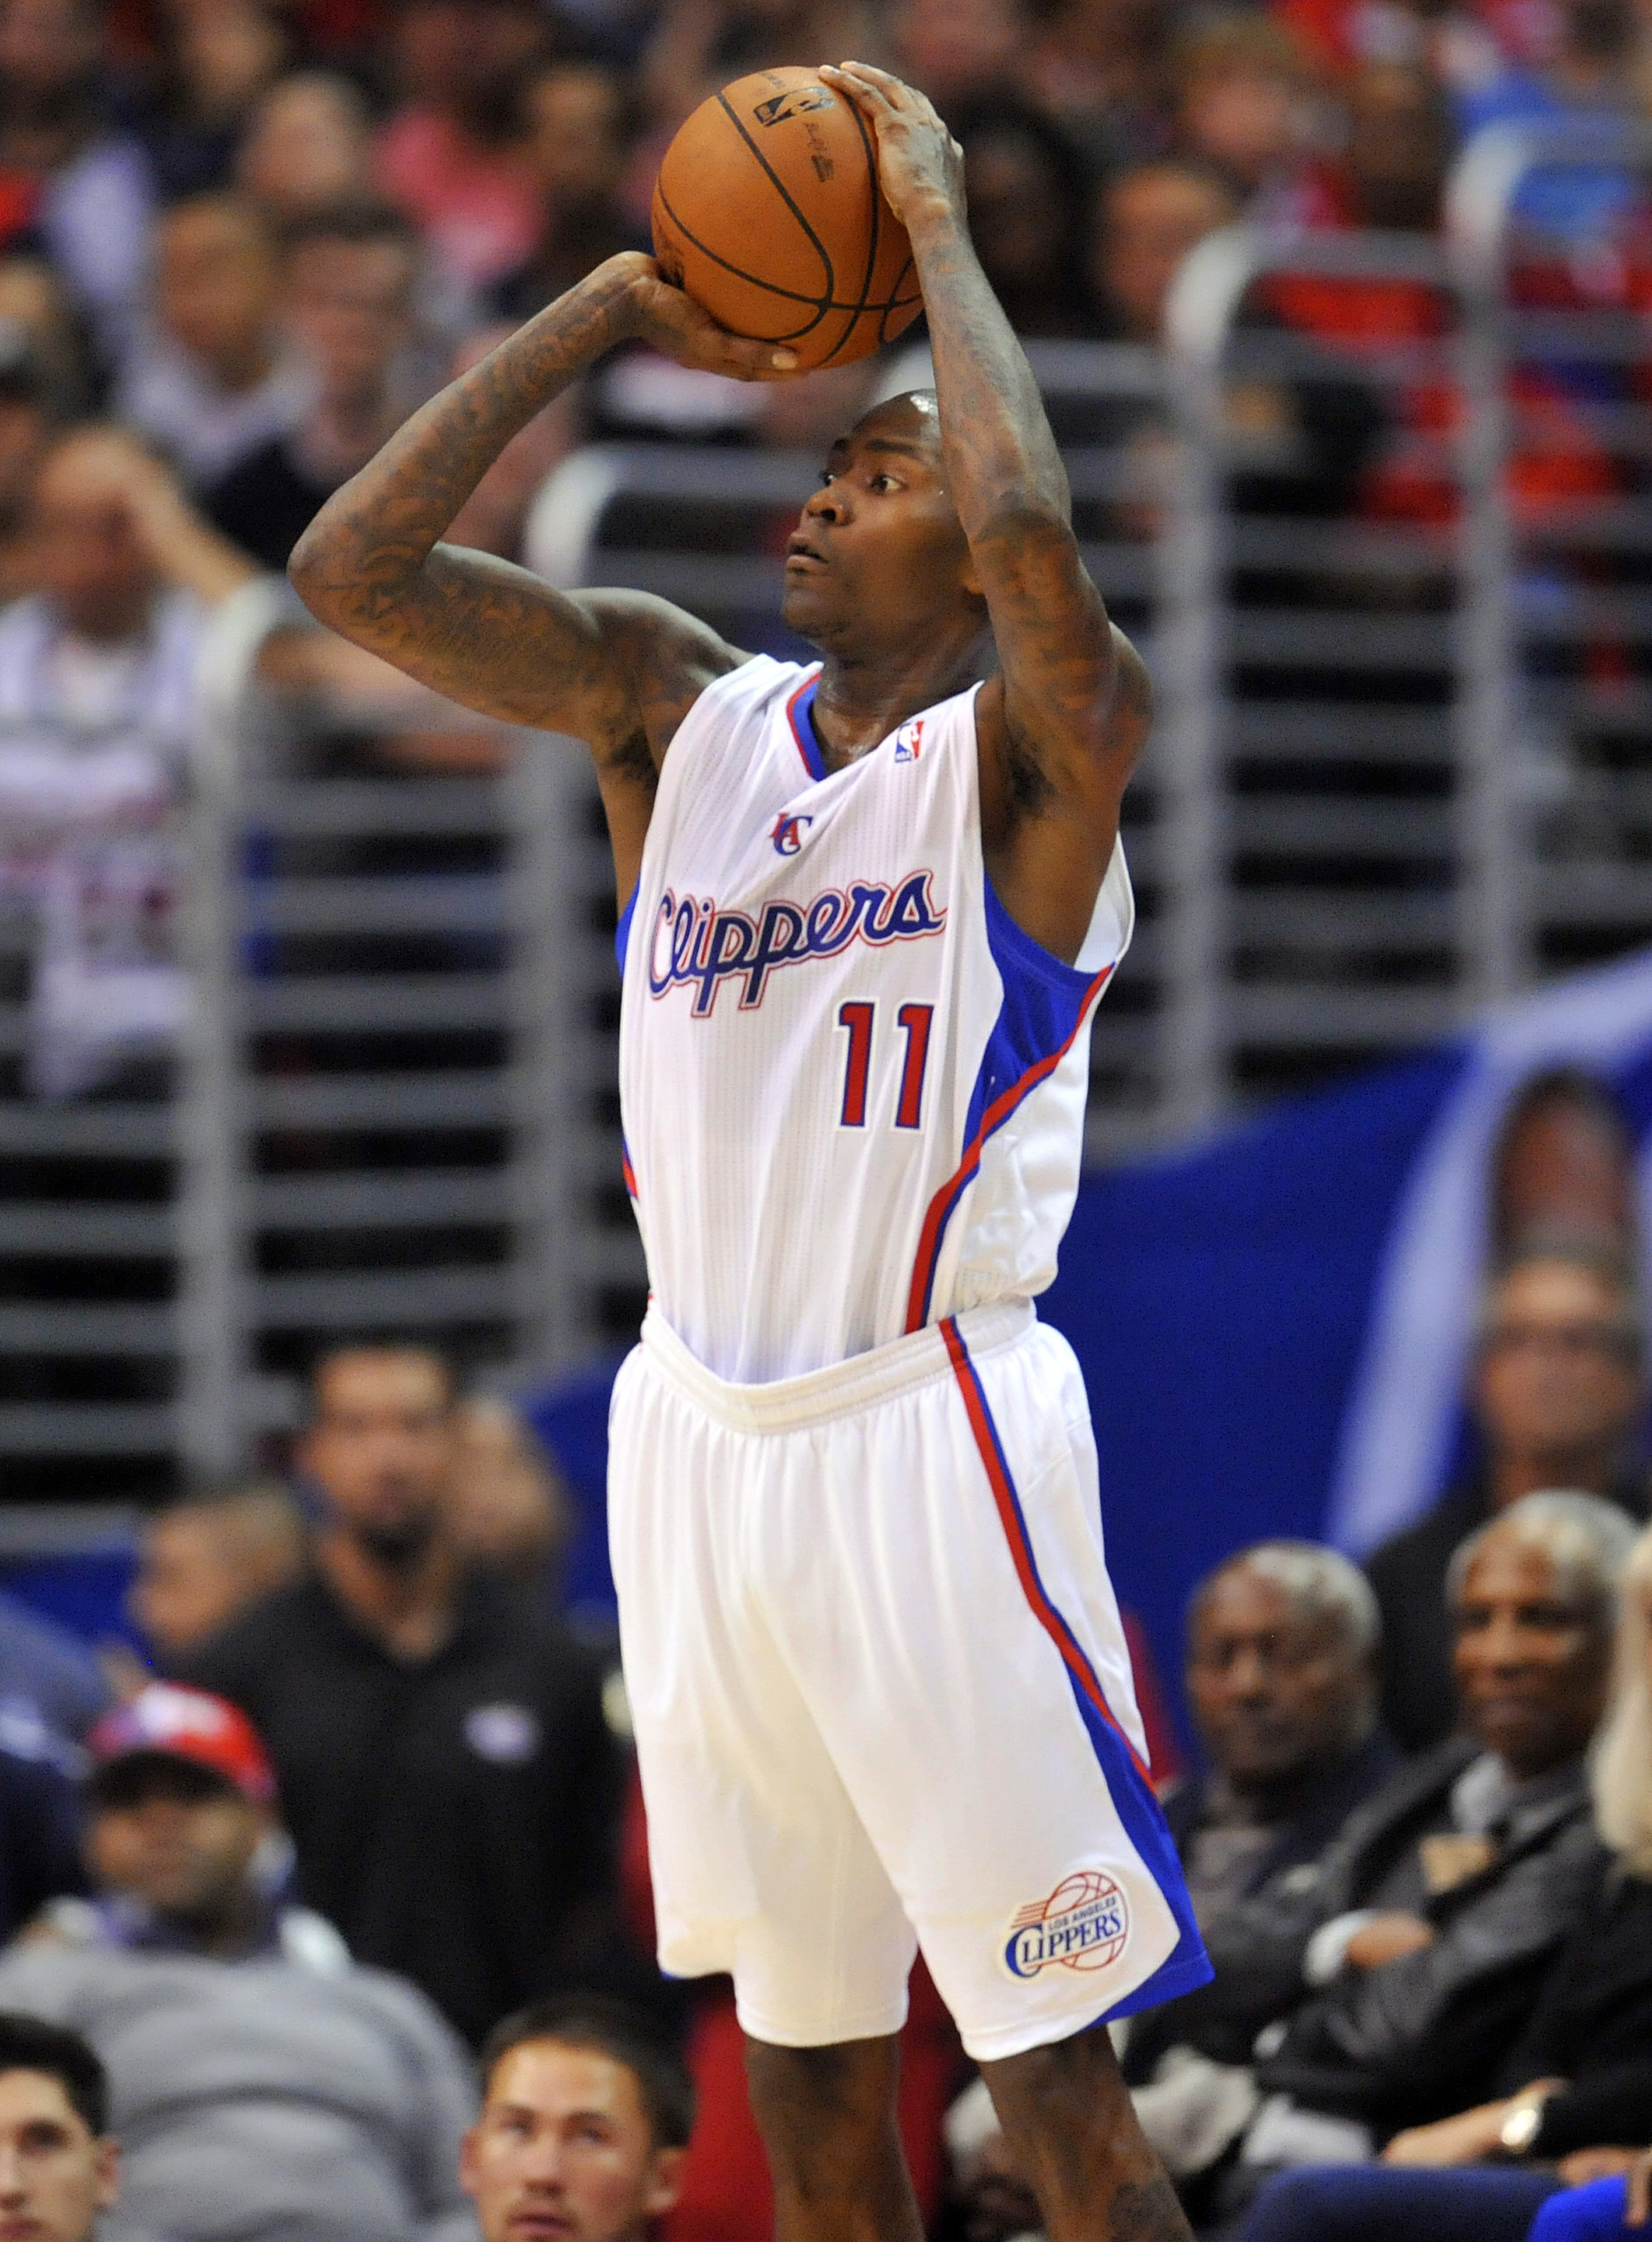 Jamal Crawford was a difference maker tonight.